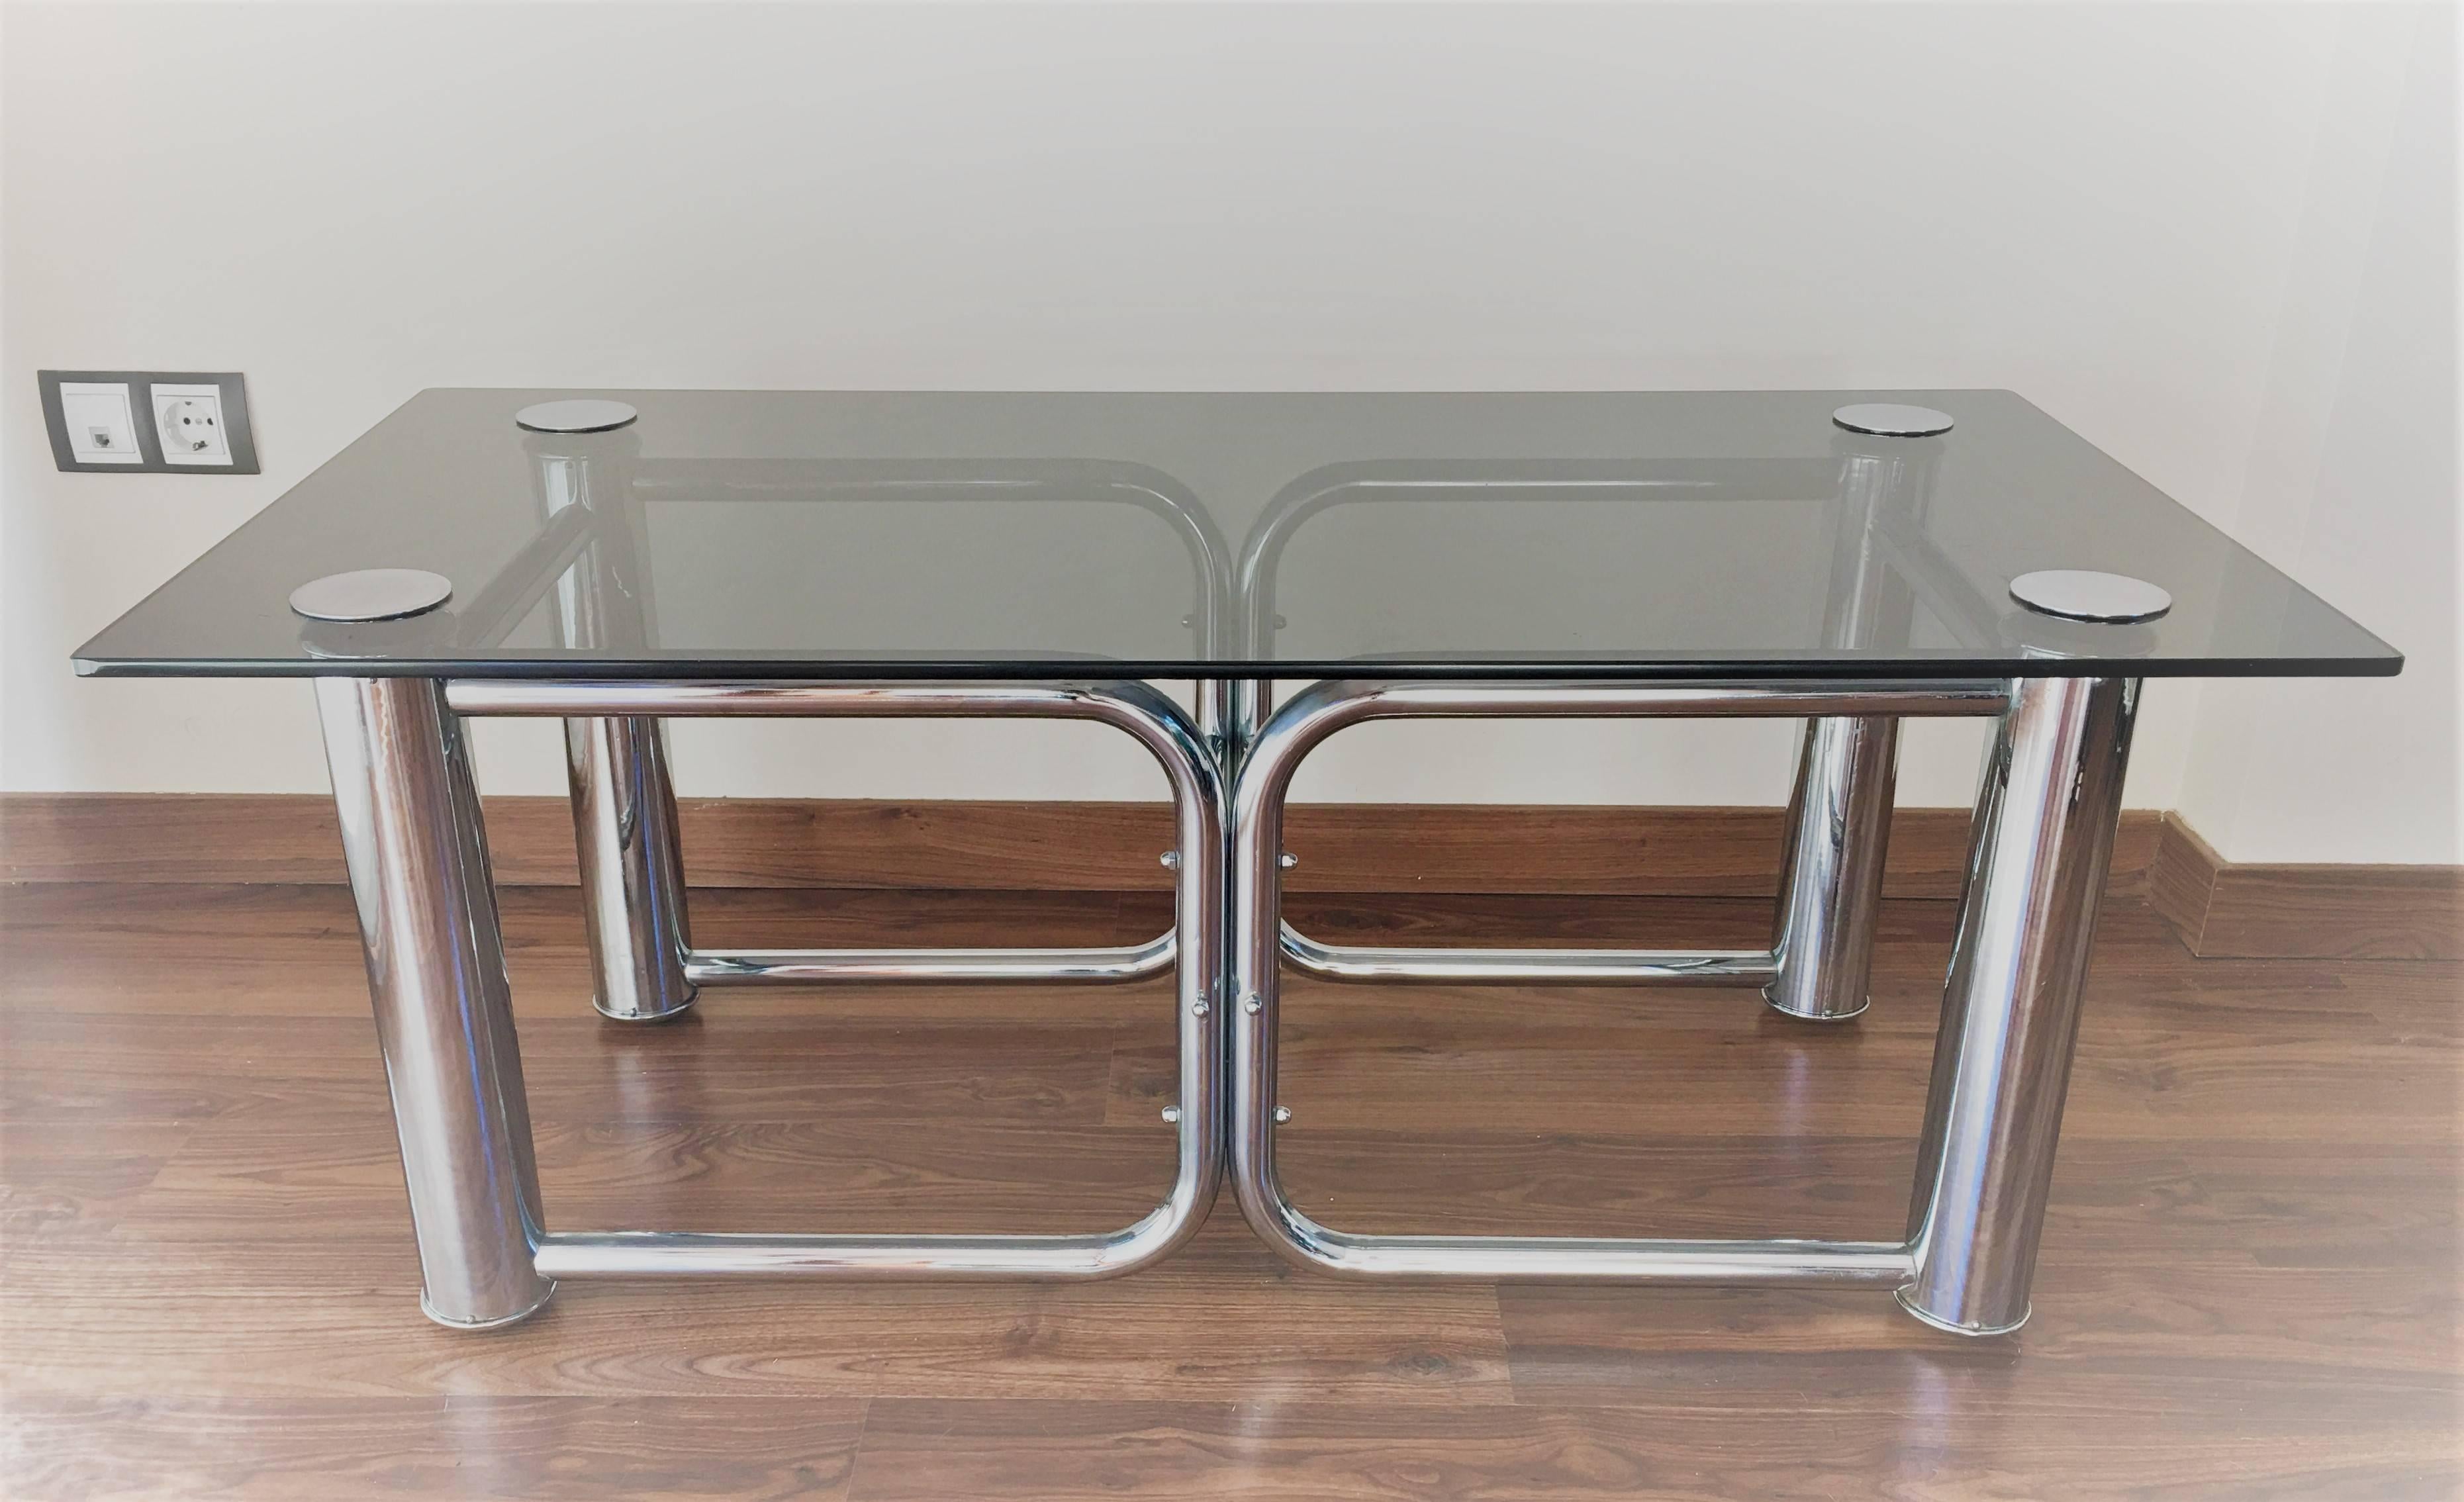 Mid-Century Modern chrome coffee table with smoked glass top.

